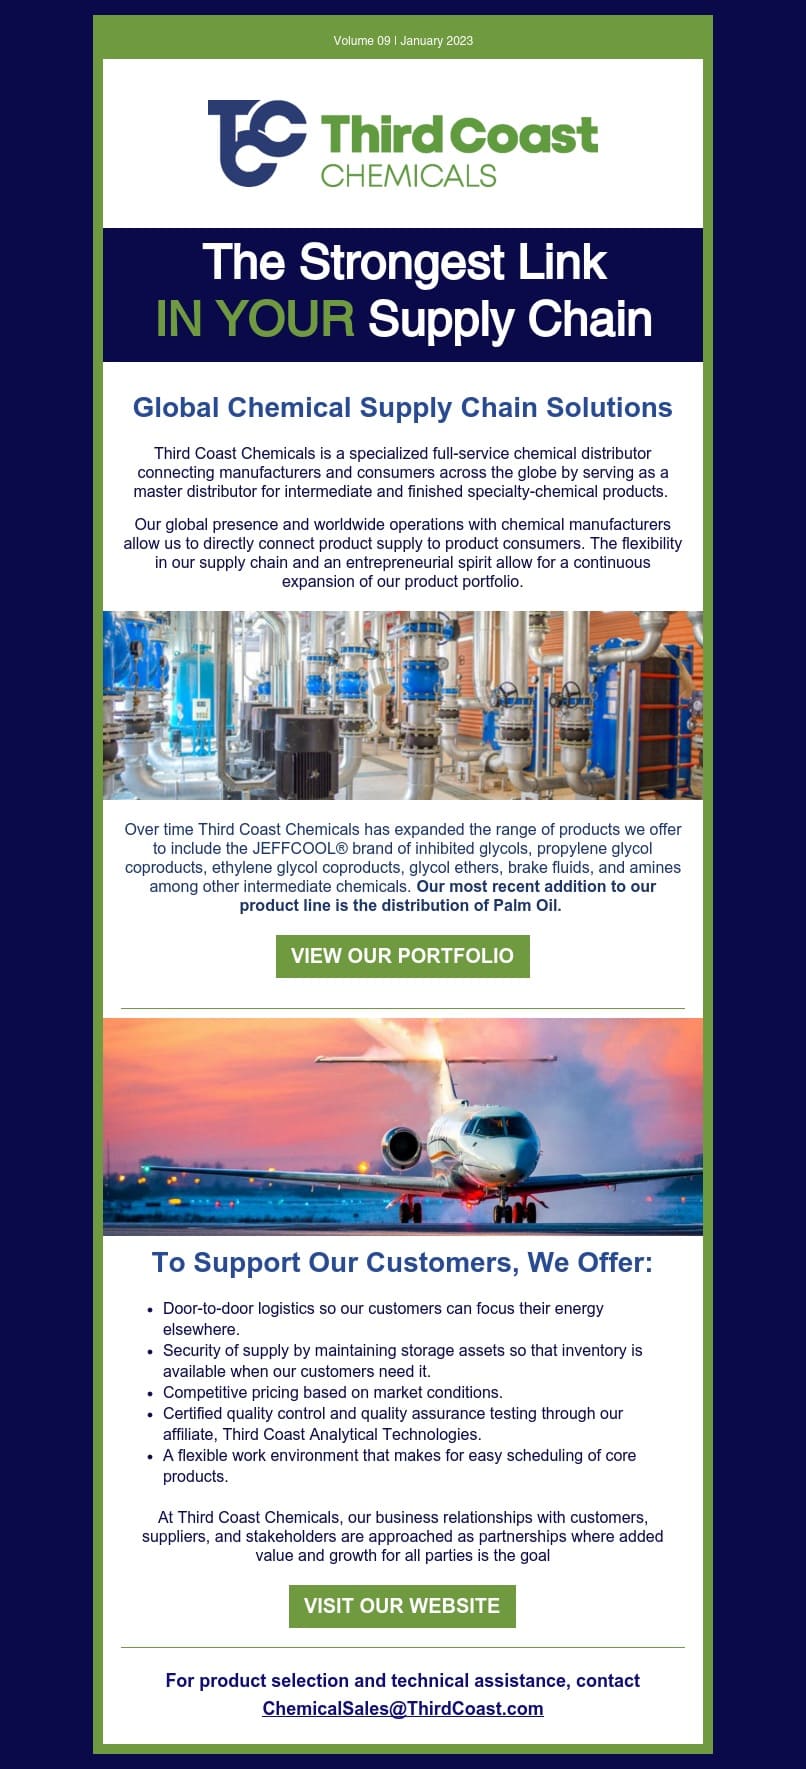 Third Coast Newsletter Volume 09 January 2023 Global Chemical Supply Chain Solutions